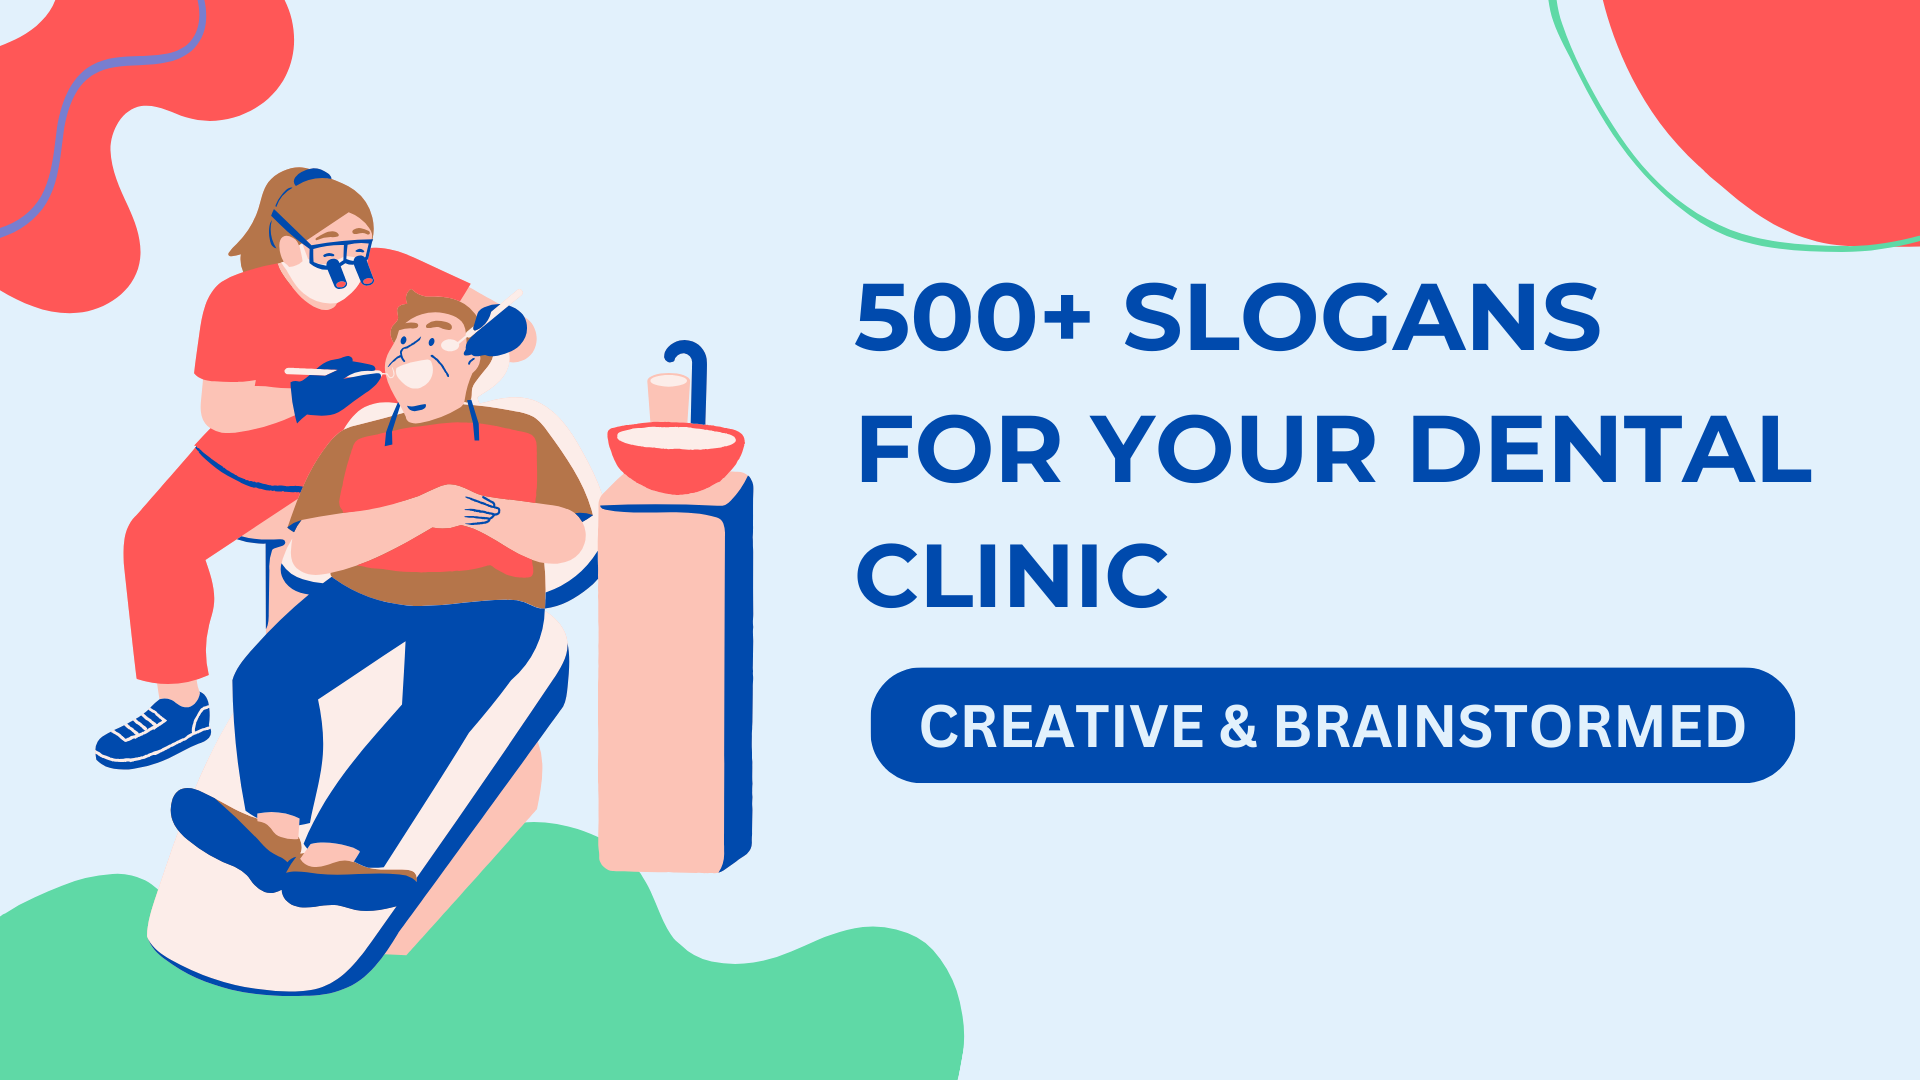 Dental clinic slogans and taglines which are catchy